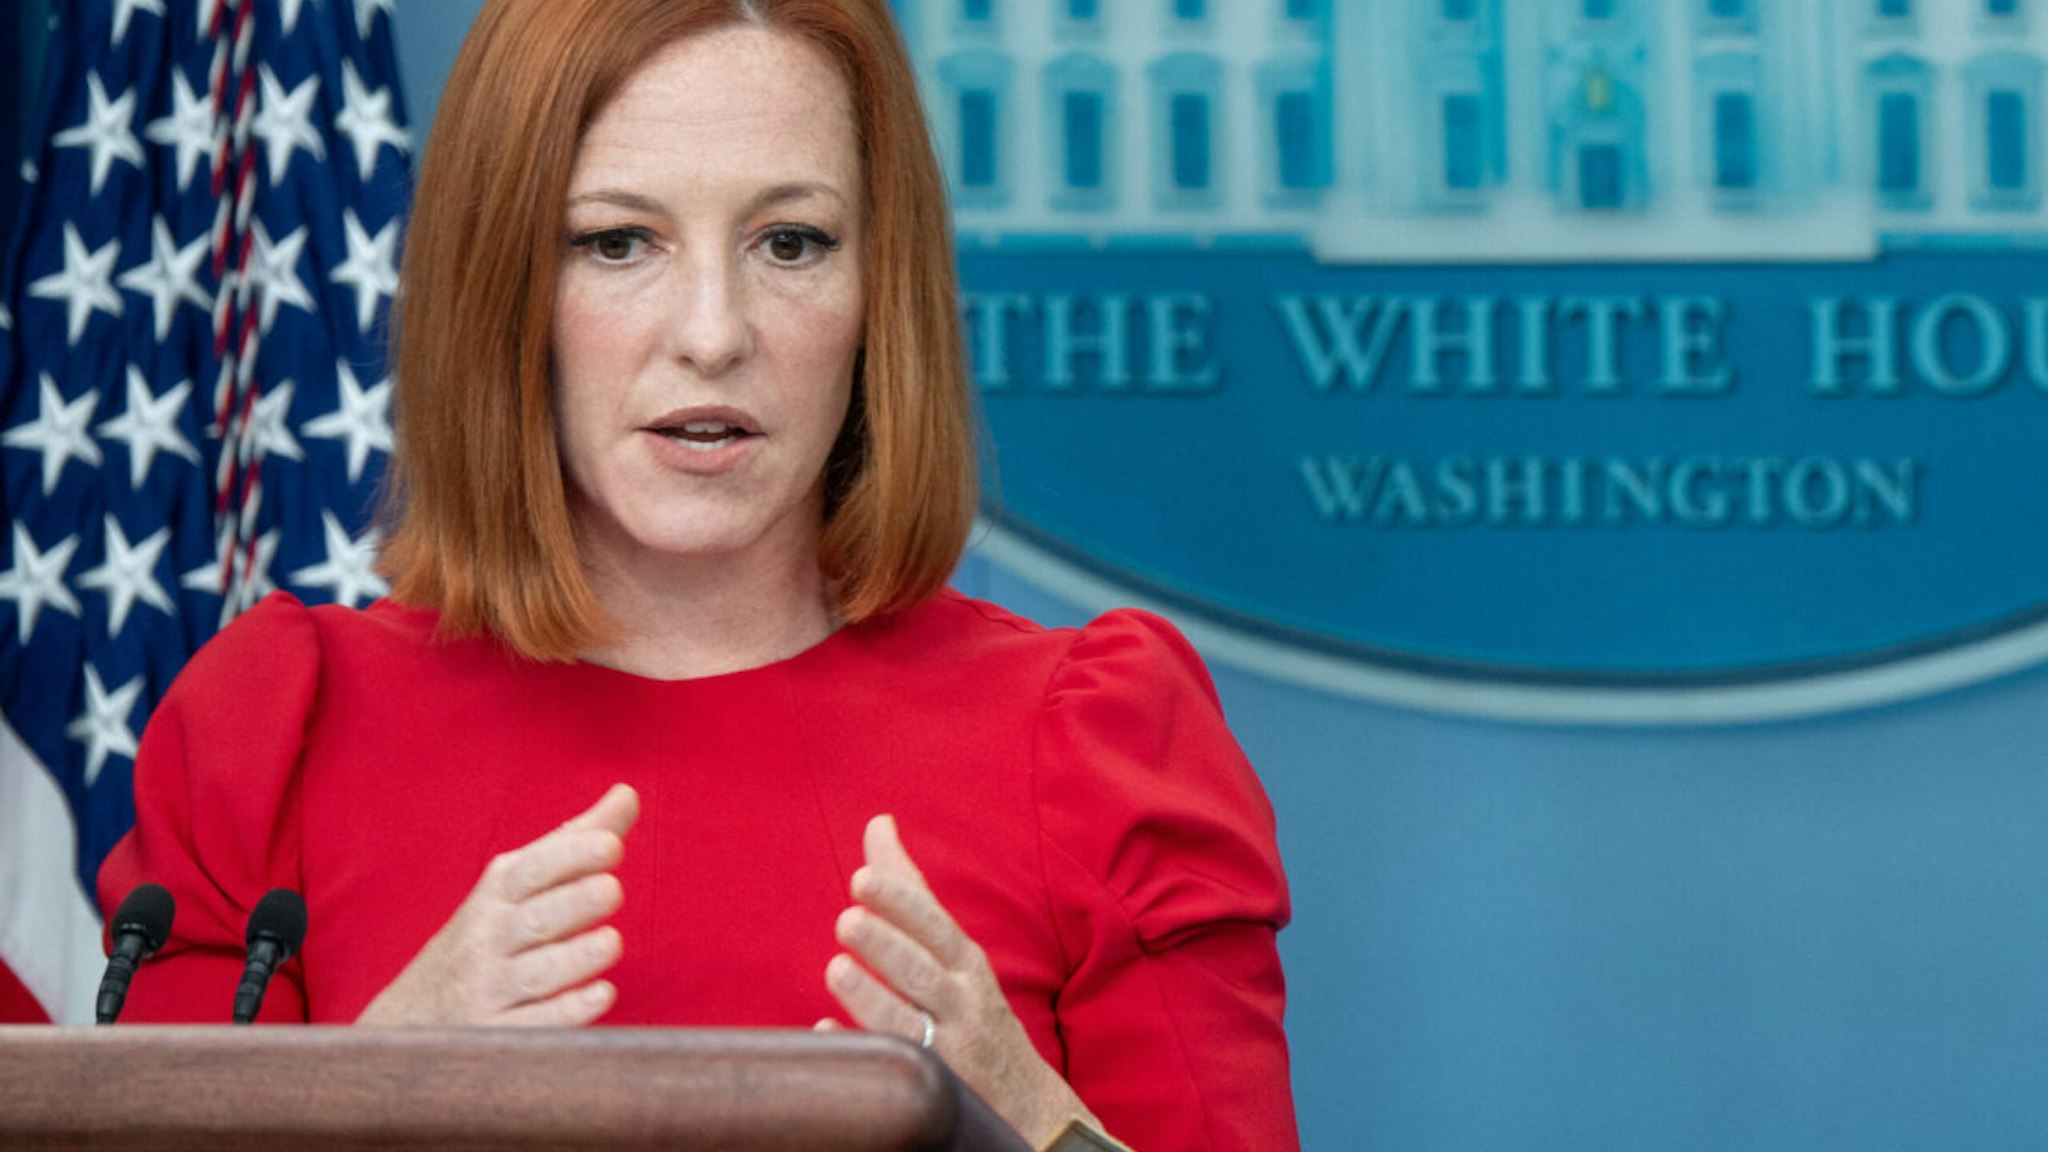 White House Press Secretary Jen Psaki speaks during a press briefing in the Brady Press Briefing Room at the White House in Washington, DC, May 4, 2022.